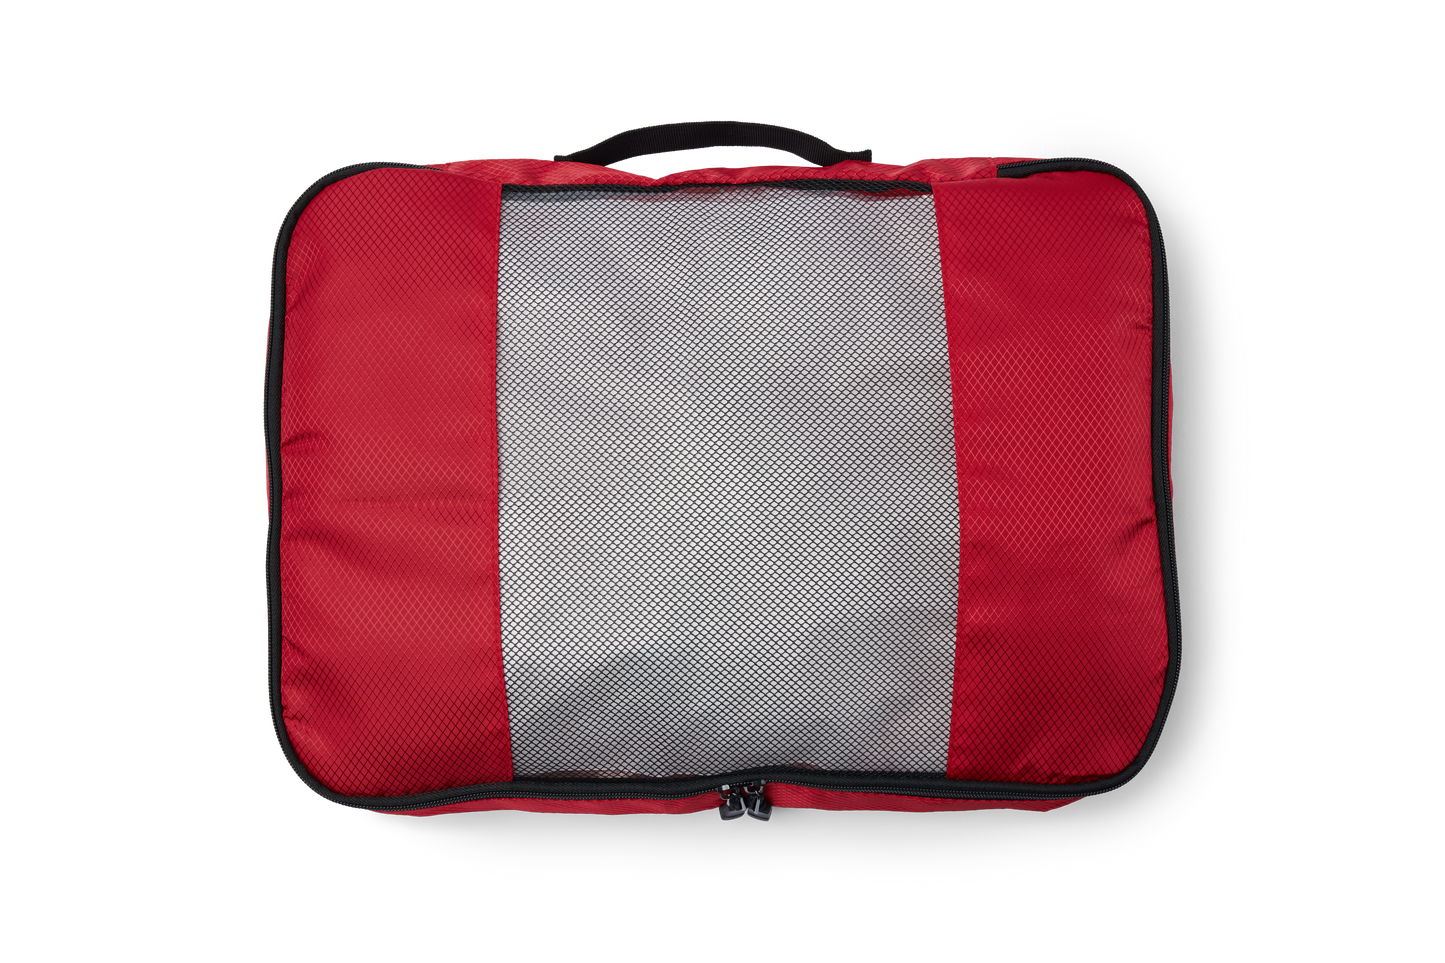 SYDNEY LUGGAGE PACKING CUBES SET OF 4 RED